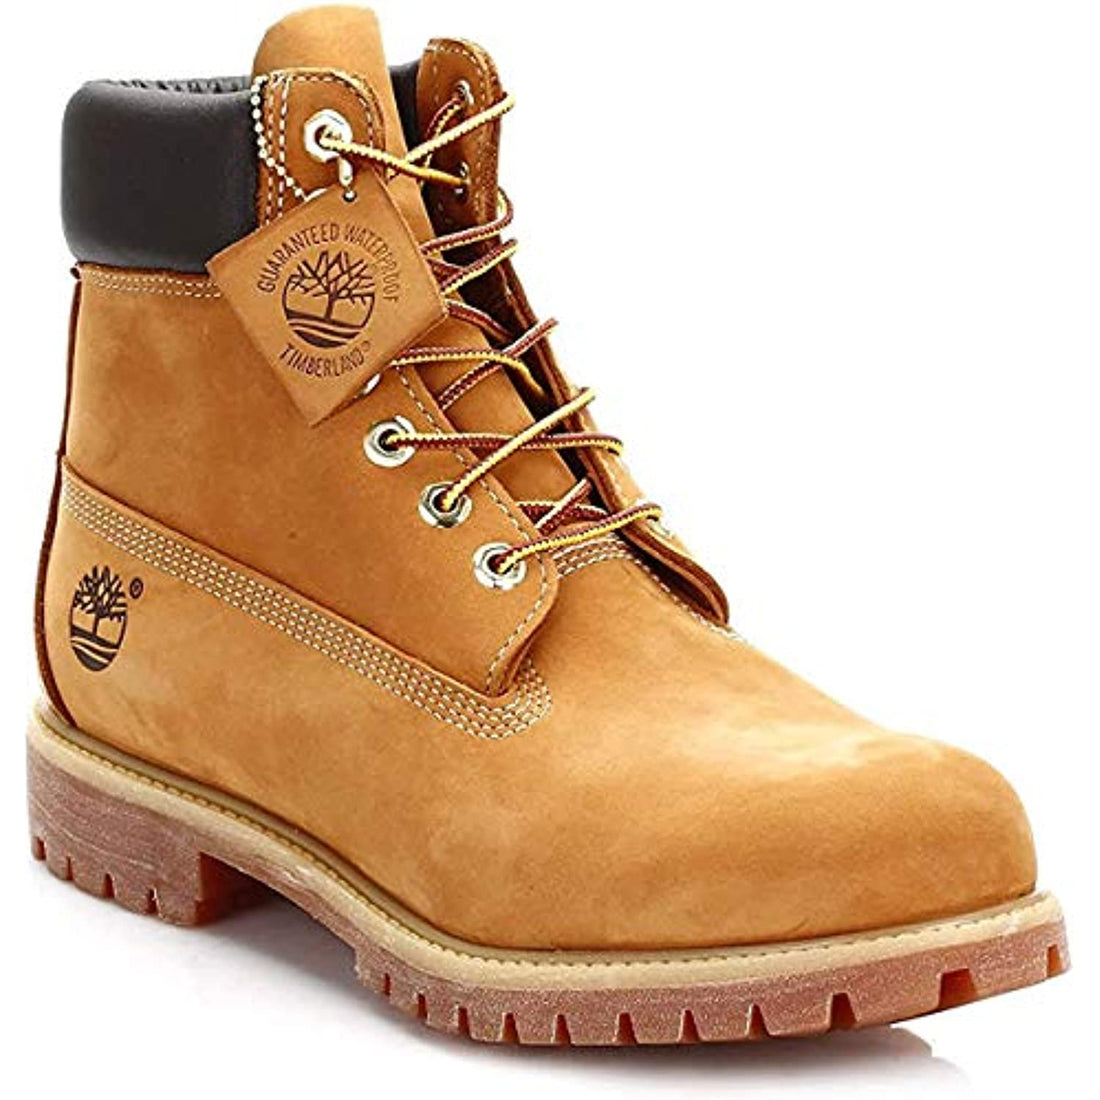 Timberland Kids 6" Premium Waterproof Boots for Toddlers